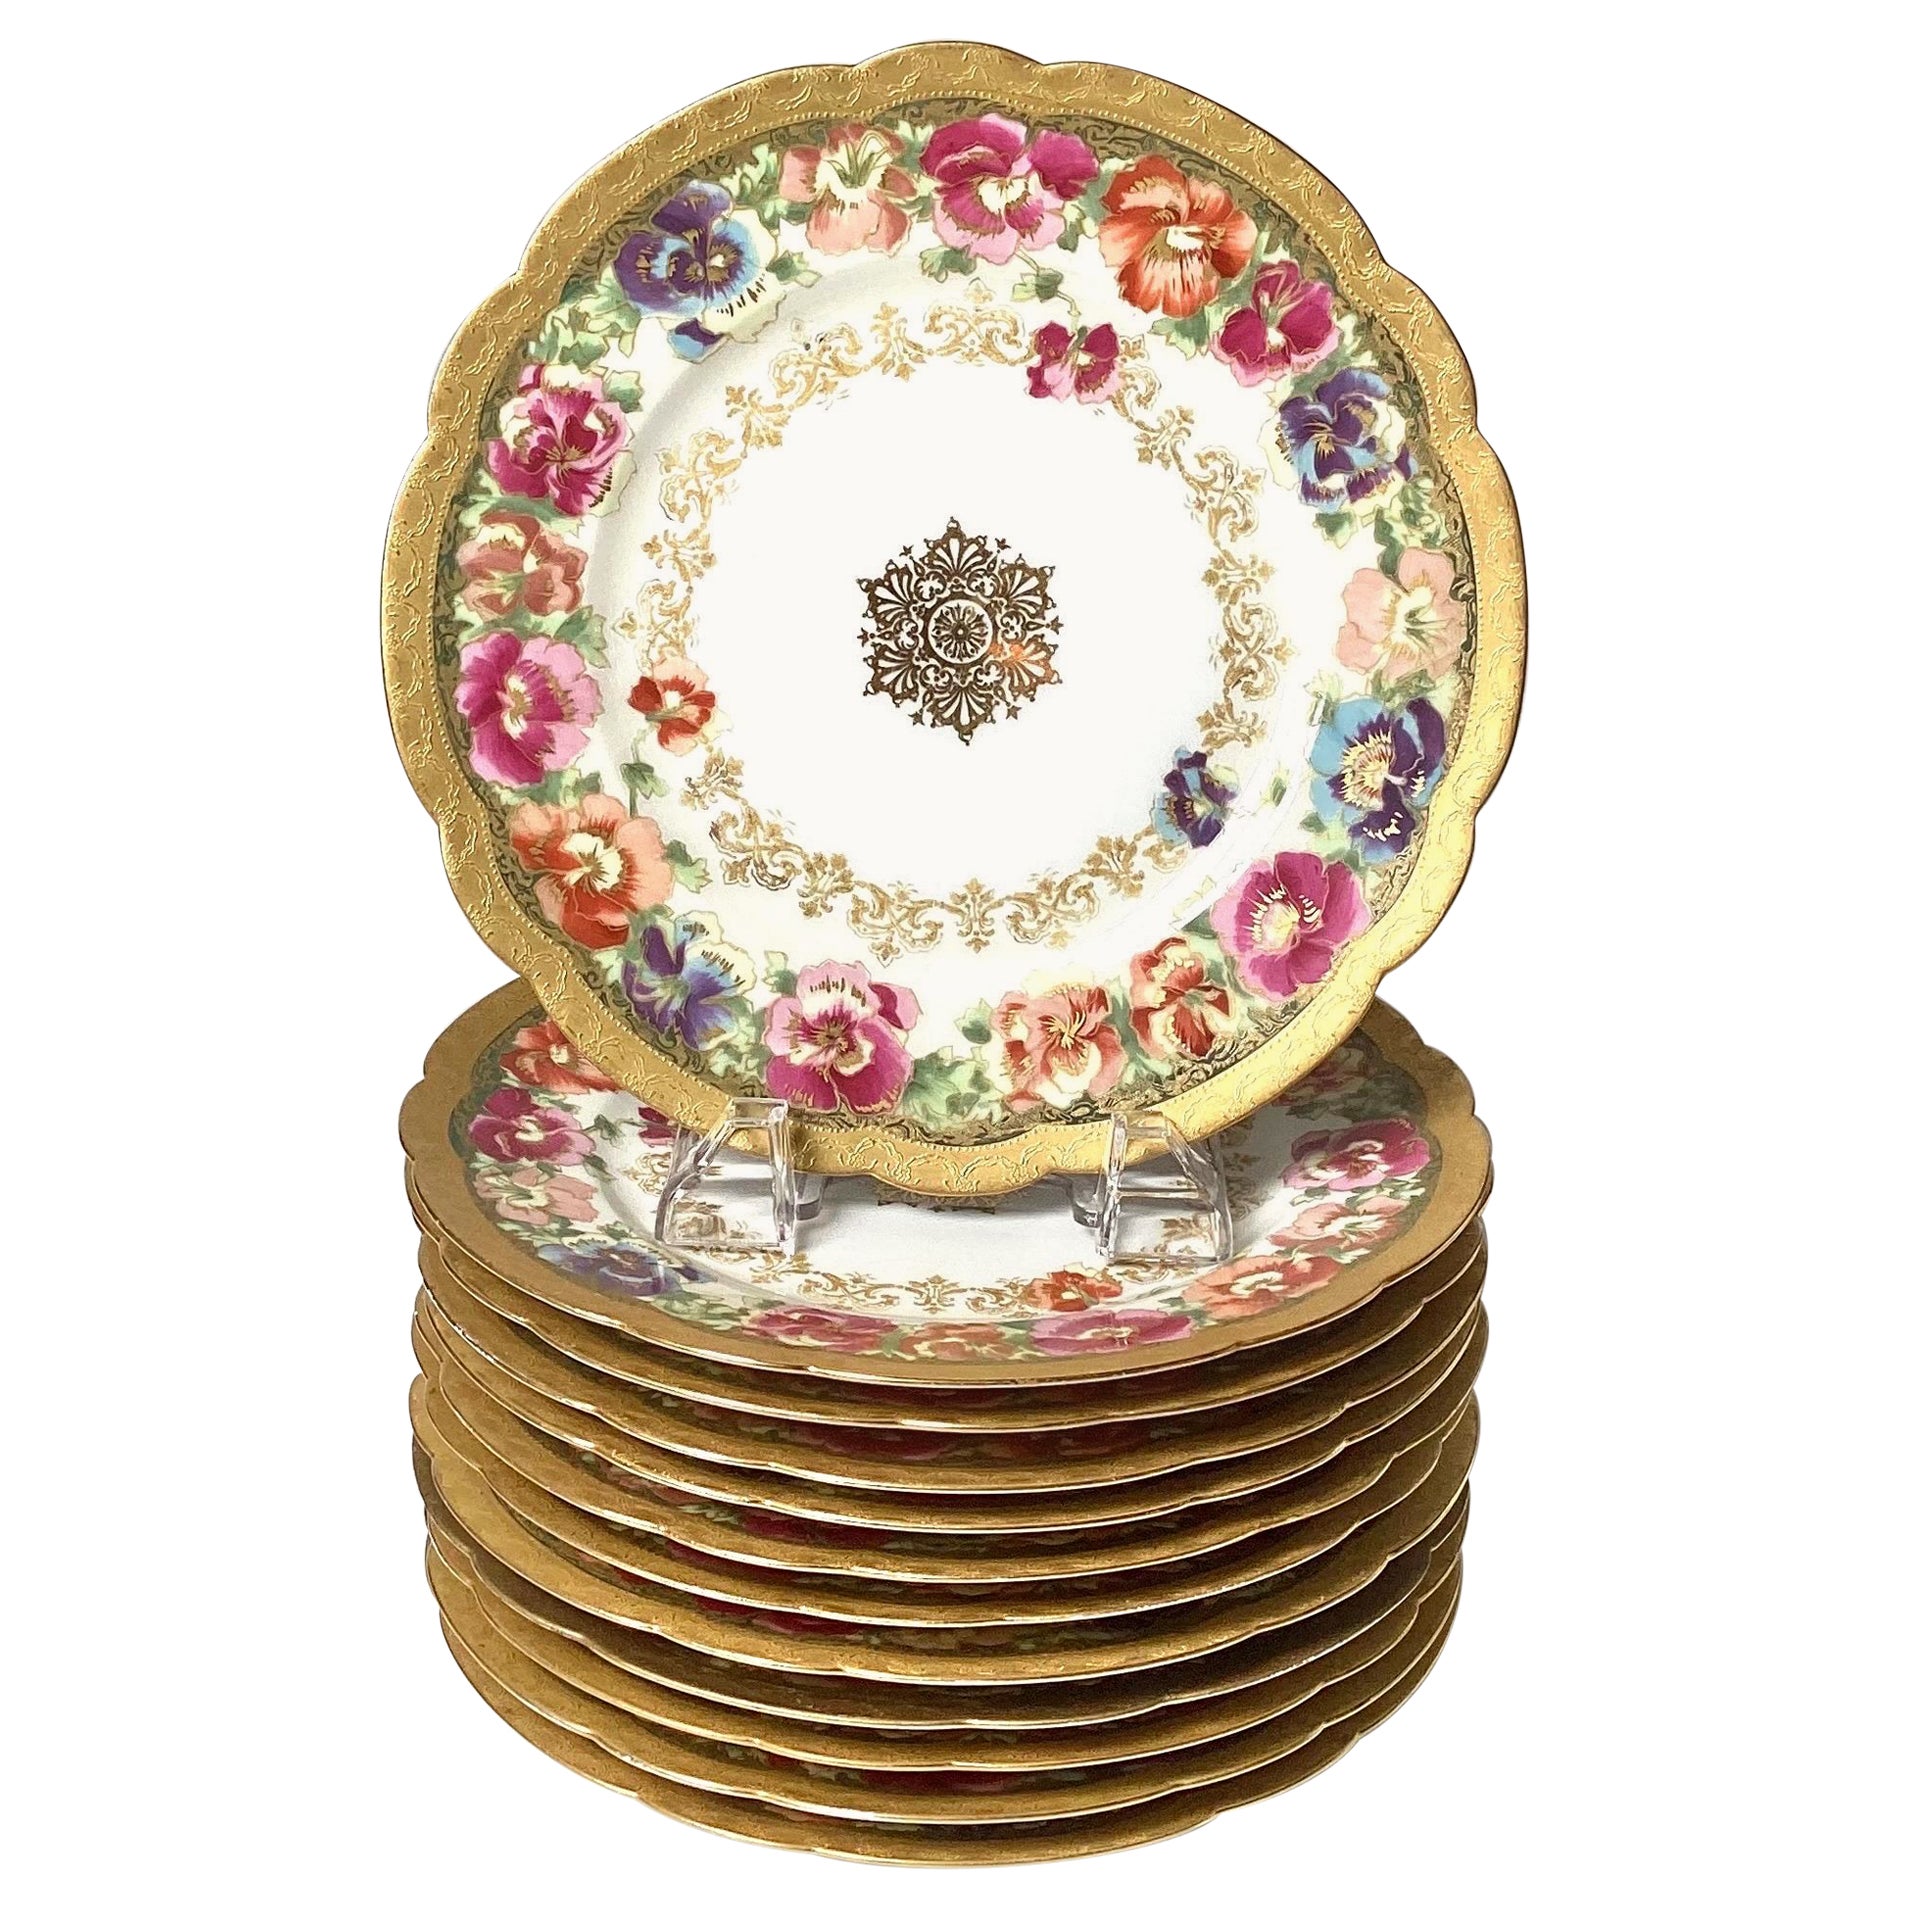 A Set of 12 French Hand Painted Porcelain Luncheon Accent Plates, Circa 1890